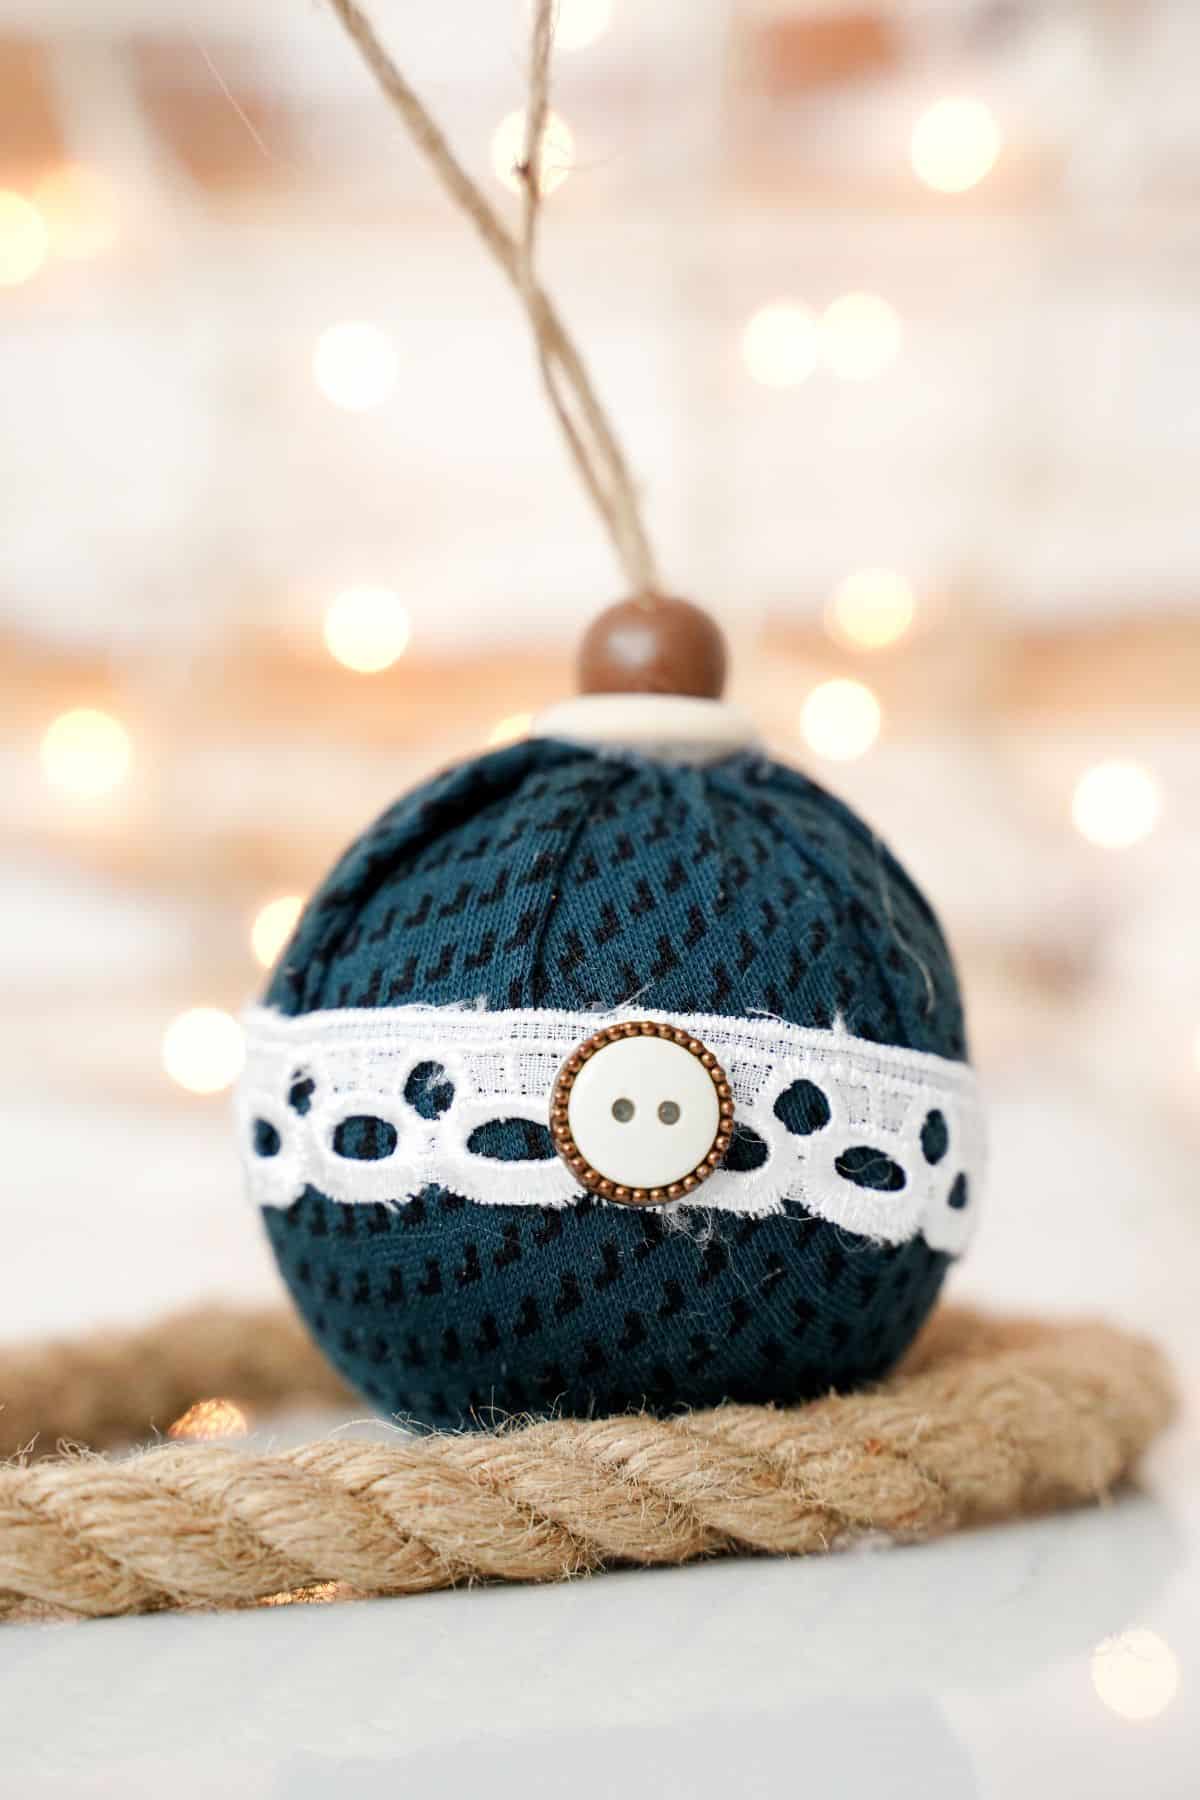 rope under fabric ball ornament on table with lights in background